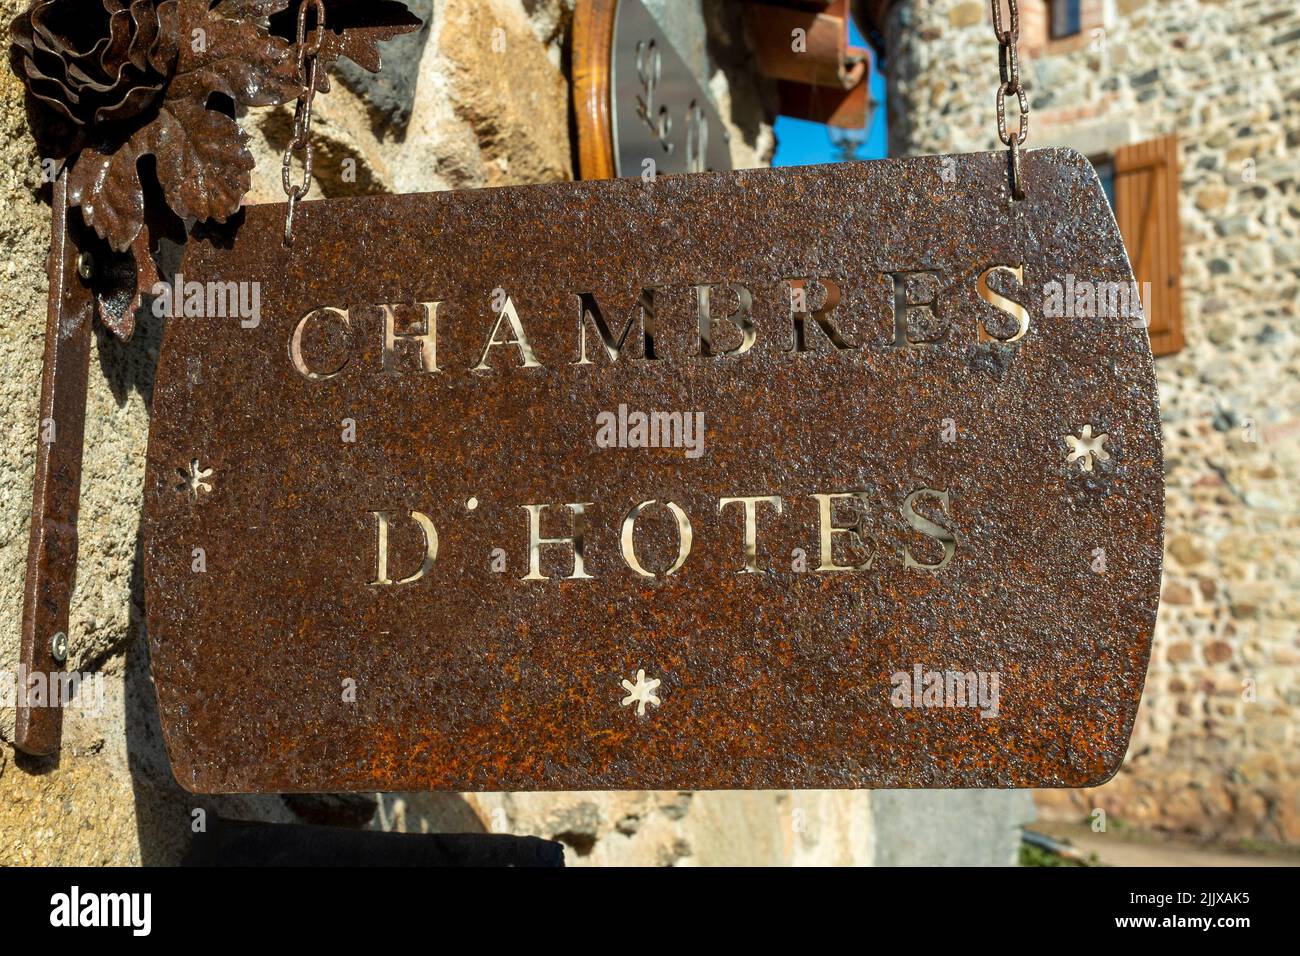 Chambres d'hote, guesthouse rooms sign. Puy de Dome. Auvergne Rhone Alpes. France Stock Photo